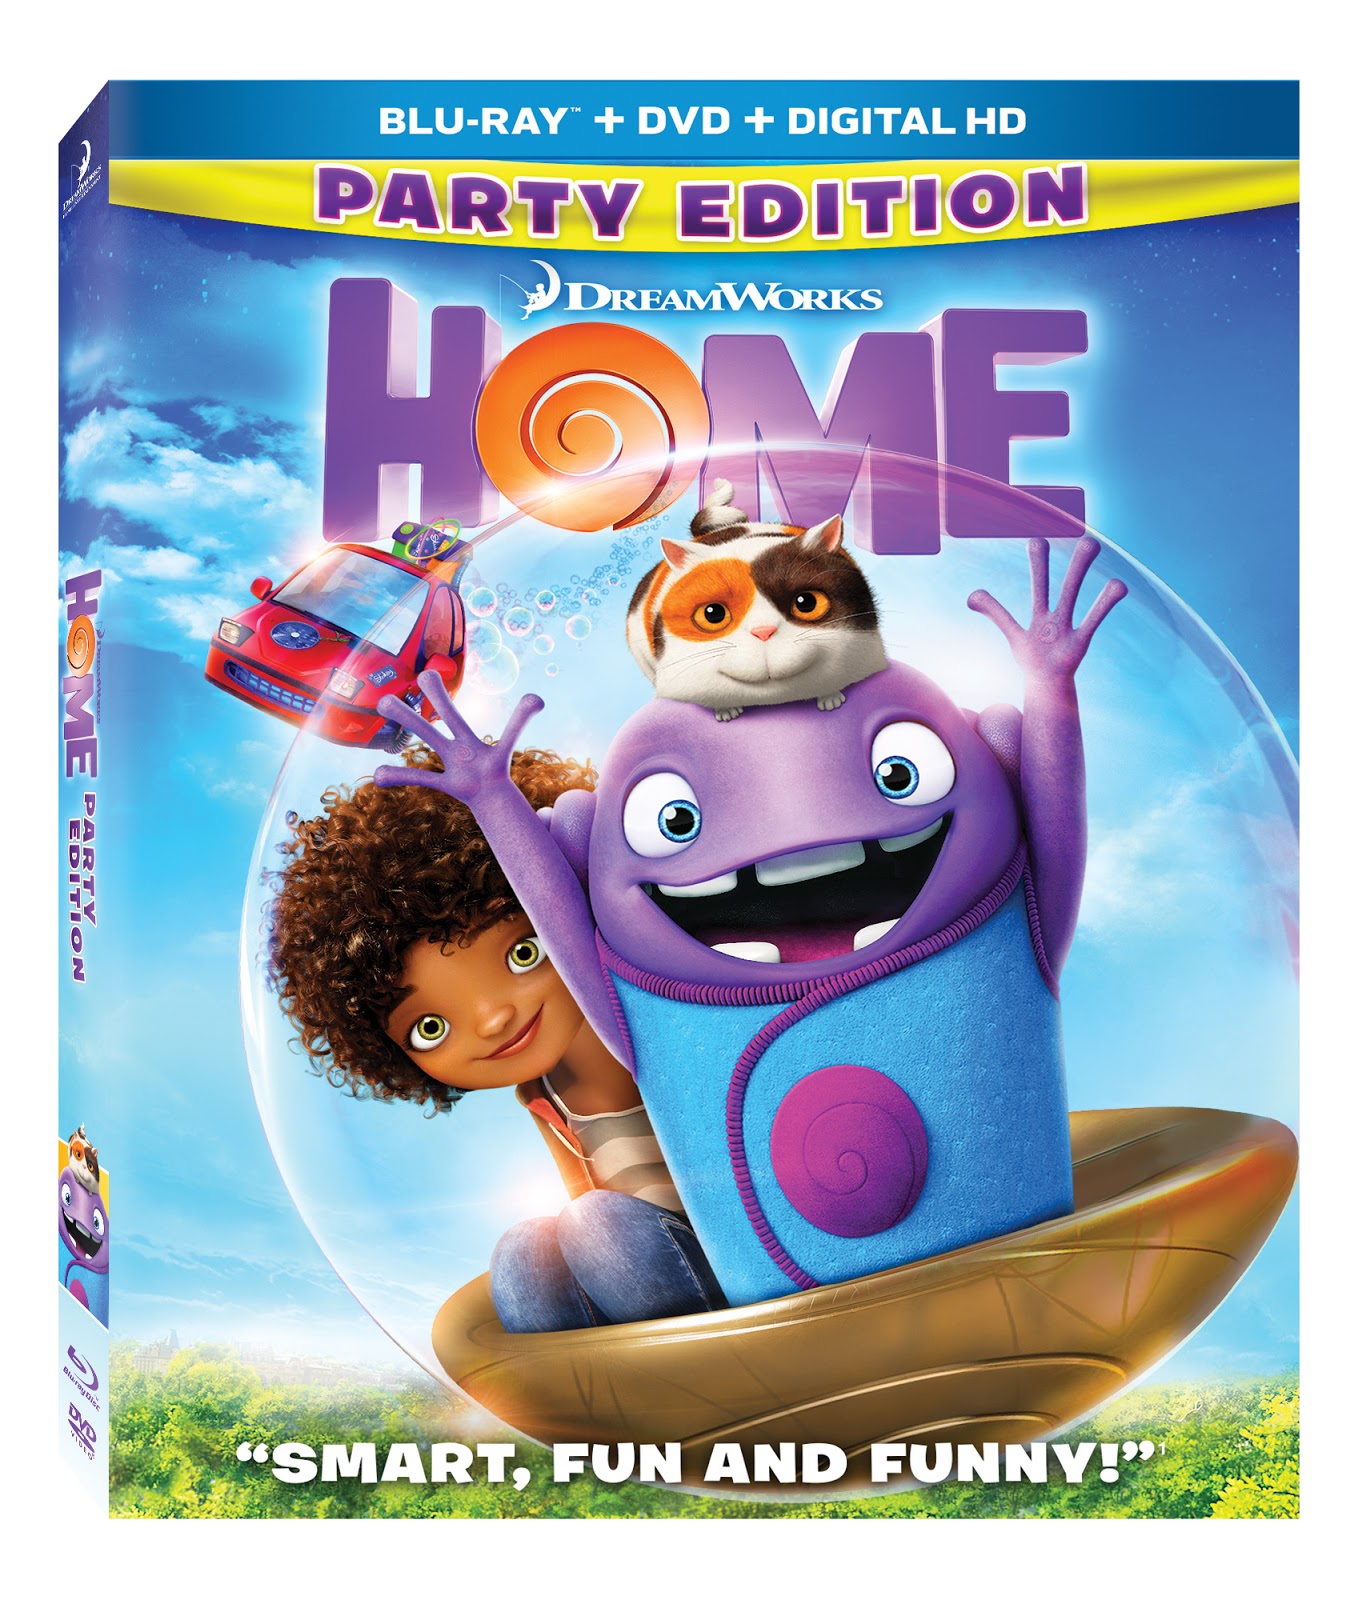 A GEEK DADDY: DreamWorks Animation HOME Movie Giveaway